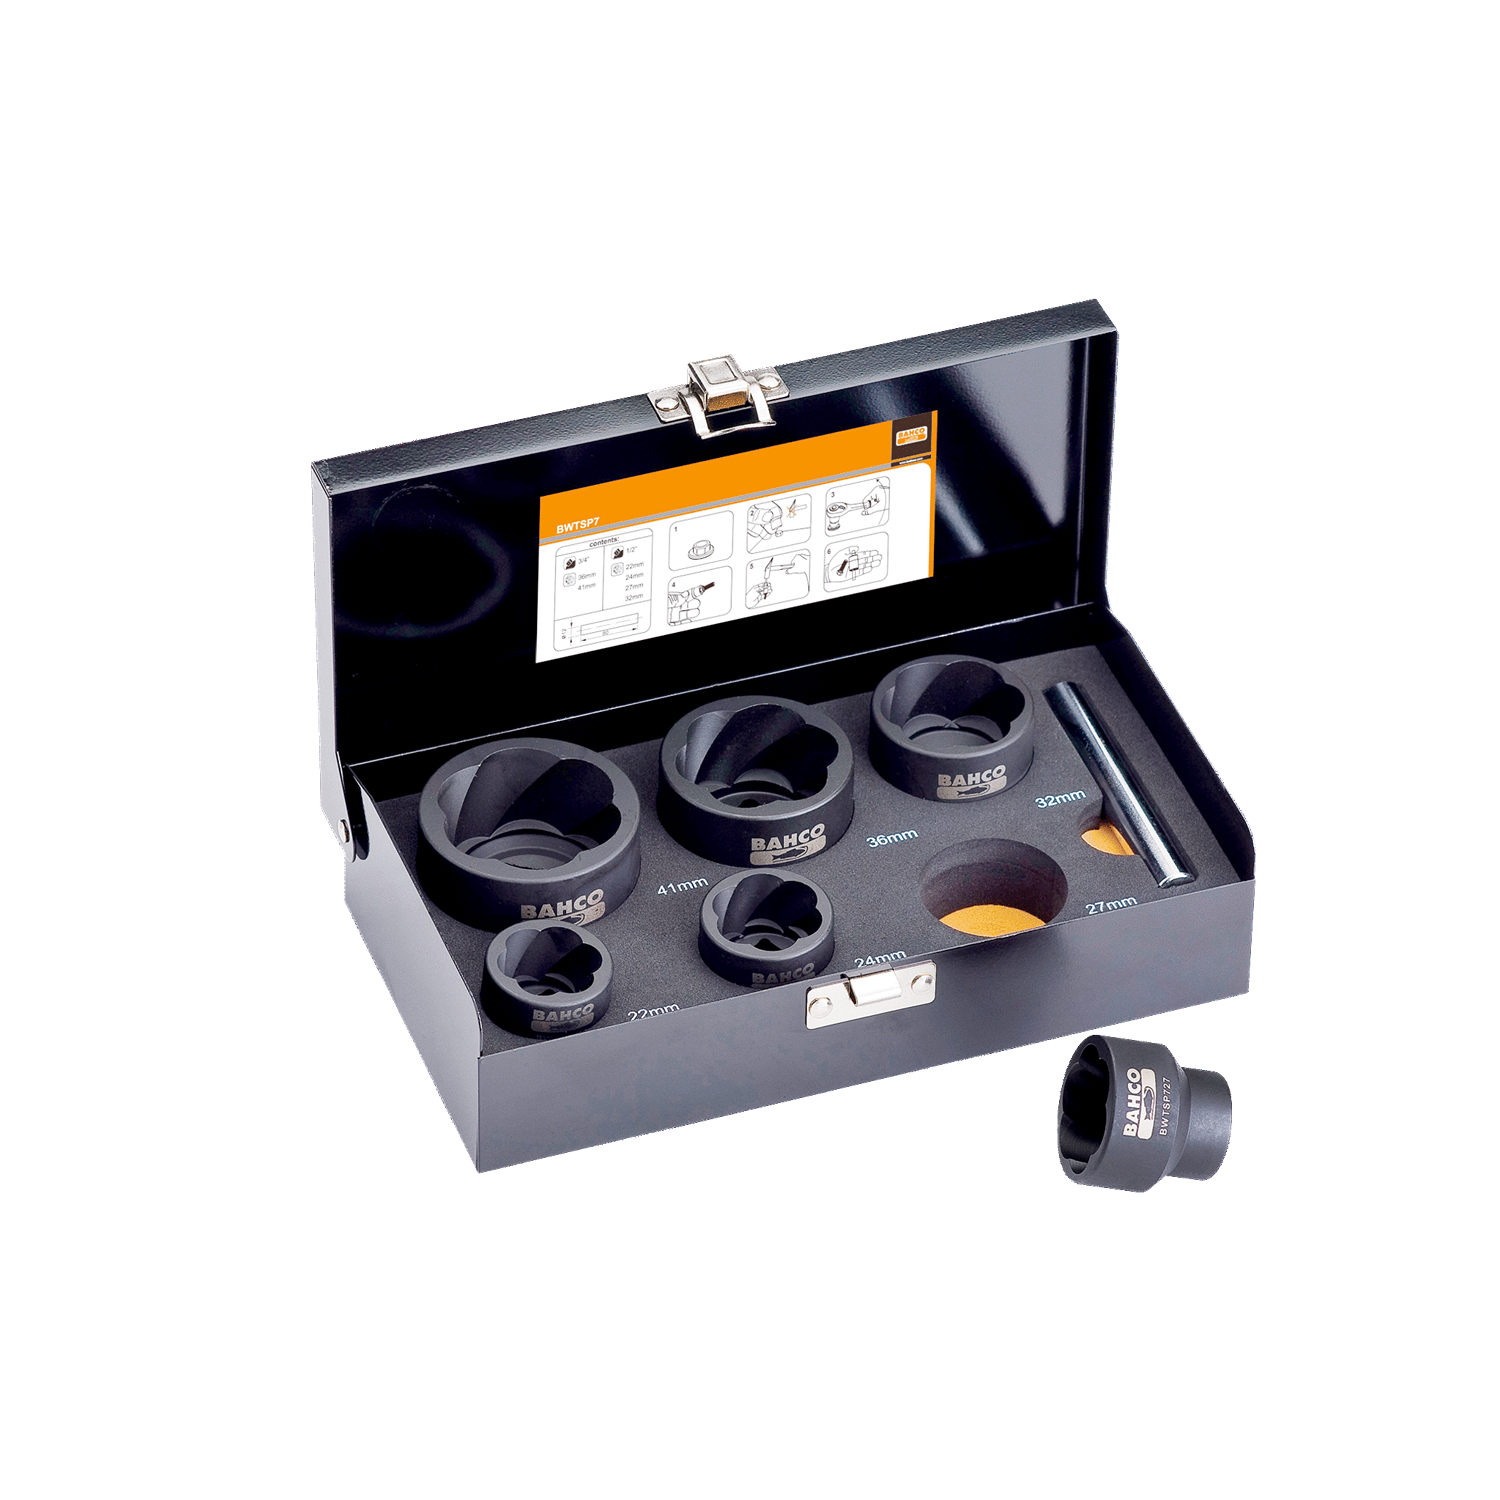 BAHCO BWTSP7 Twist Socket Set (BAHCO Tools) - Premium Socket Set from BAHCO - Shop now at Yew Aik.